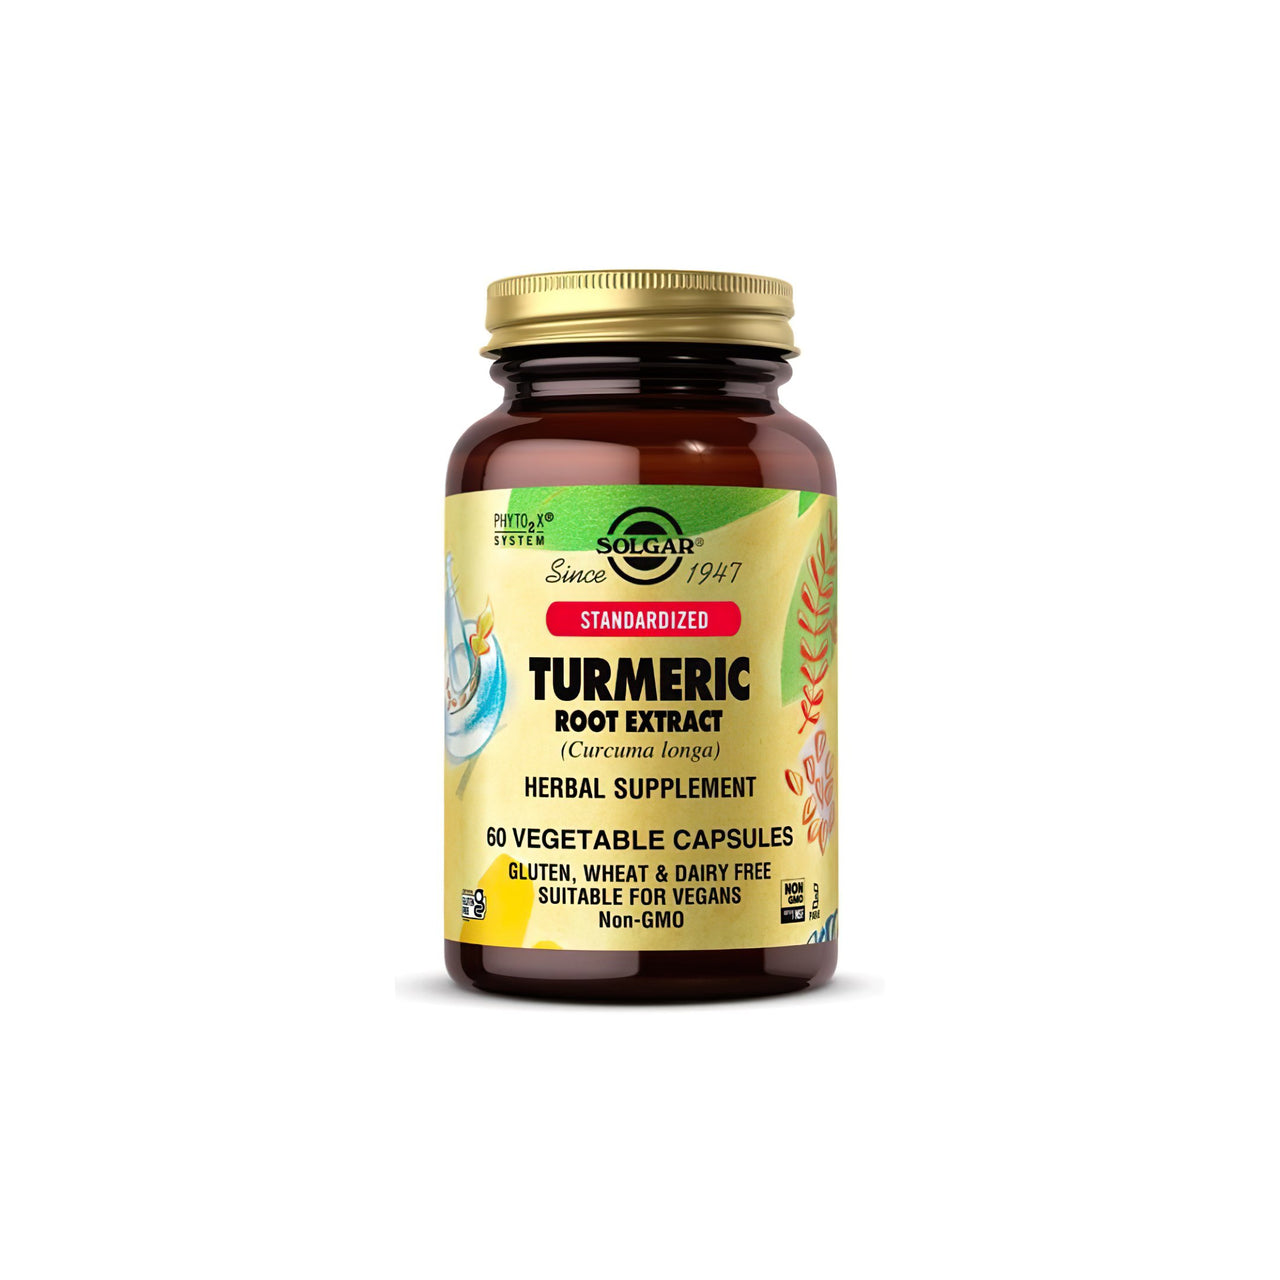 Solgar's Standardized Turmeric Root Extract 400 mg 60 Vegetable Capsules is a powerful supplement that offers antioxidant support and possesses health-promoting properties. Derived from turmeric root extract, this product harnesses the natural benefits of turmeric to promote overall well-being.